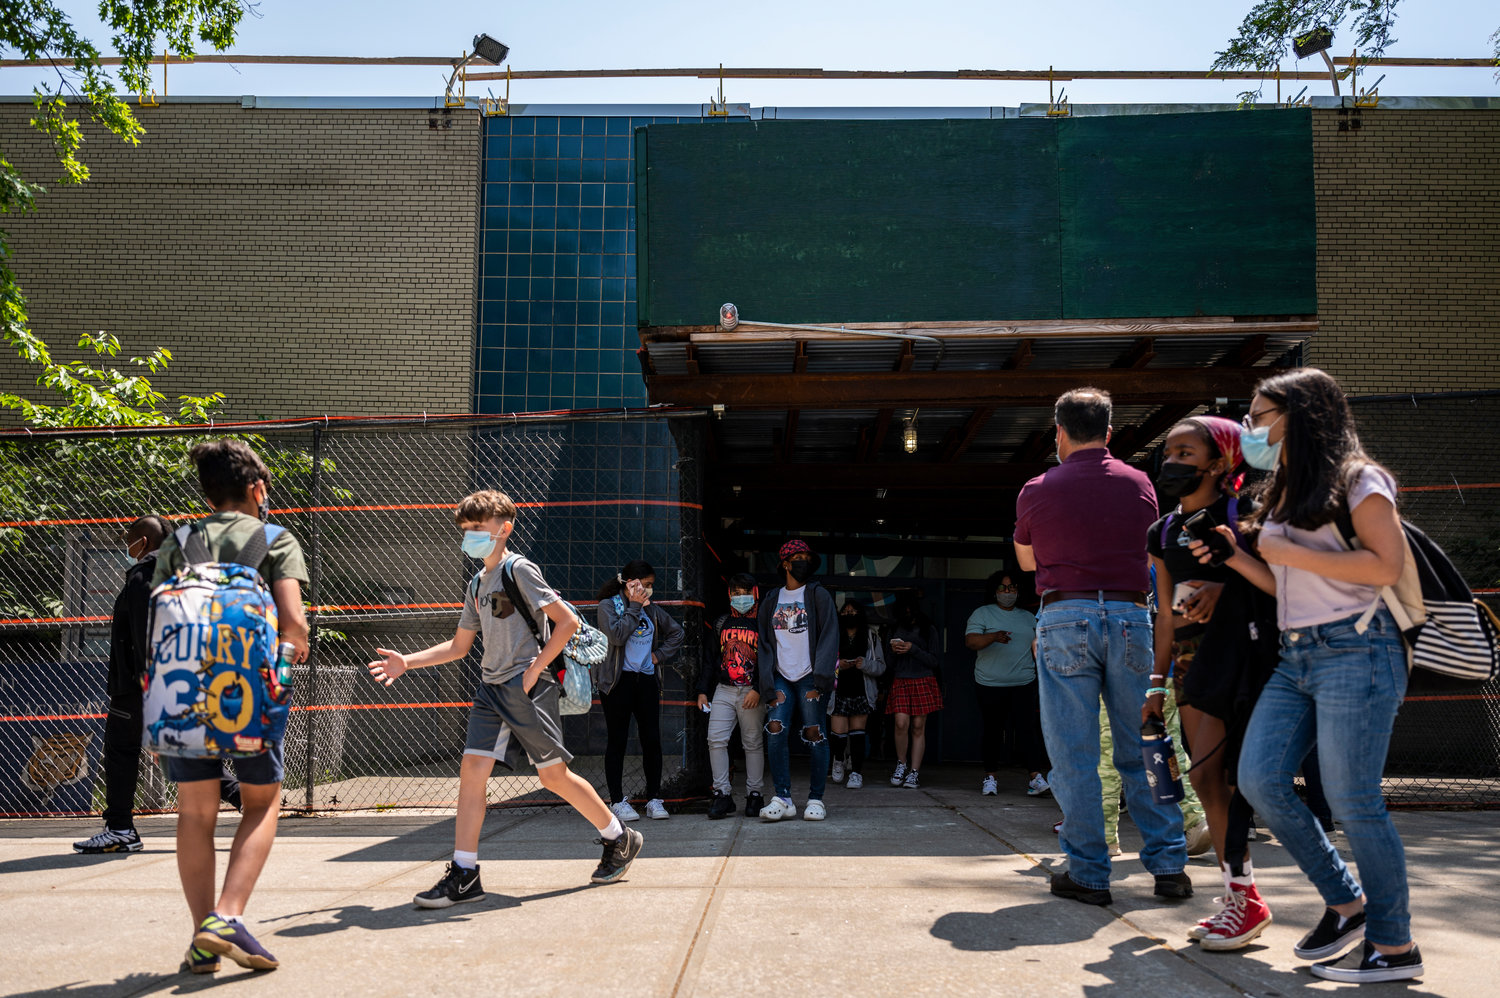 Public schools haven’t been the same since March 2020. But that could very well change by September, with public schools fully reopening without hybrid or remote learning.